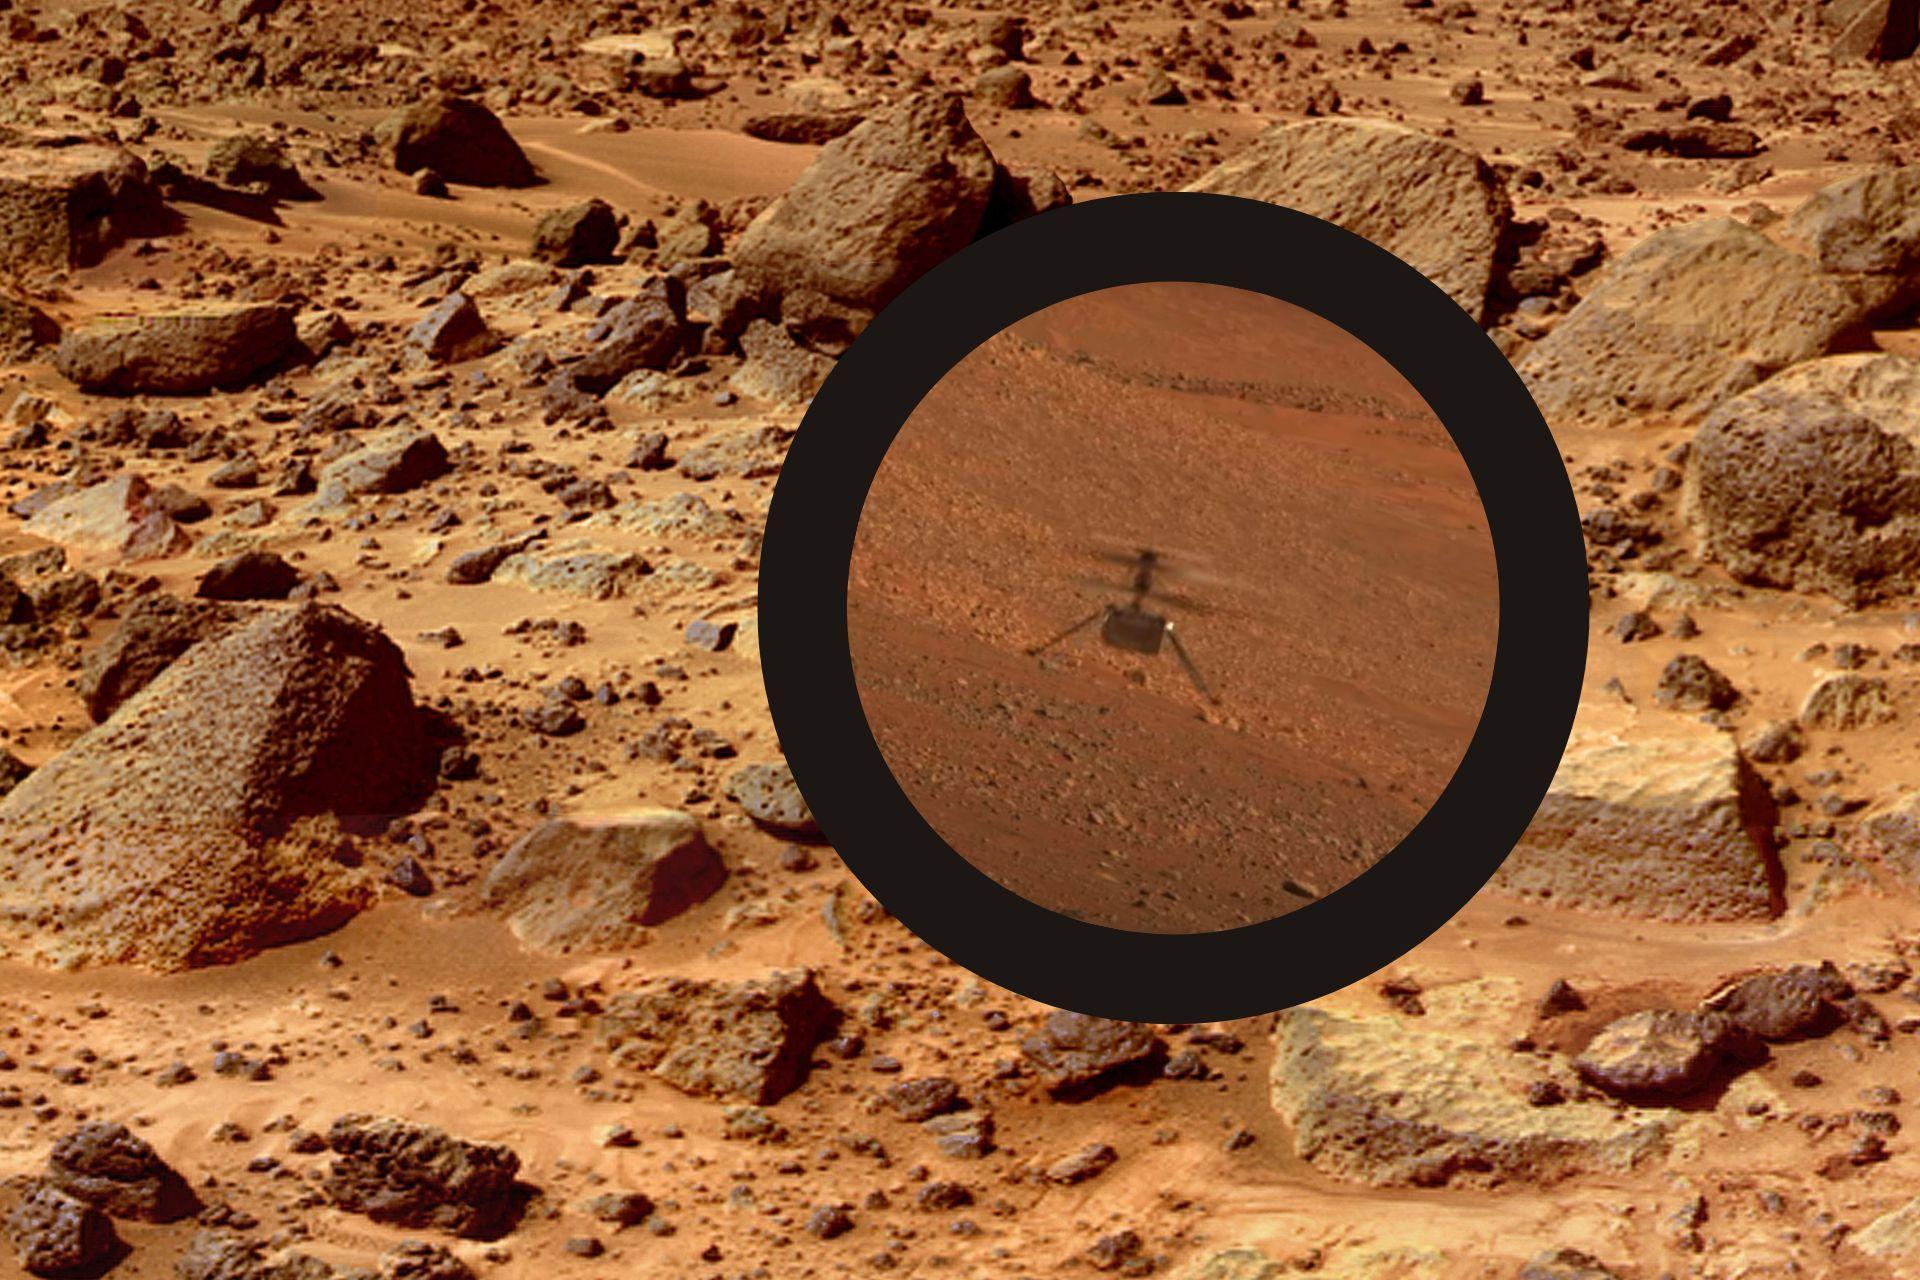 Video of Mars from NASA.  A small helicopter flying over the surface of the red planet